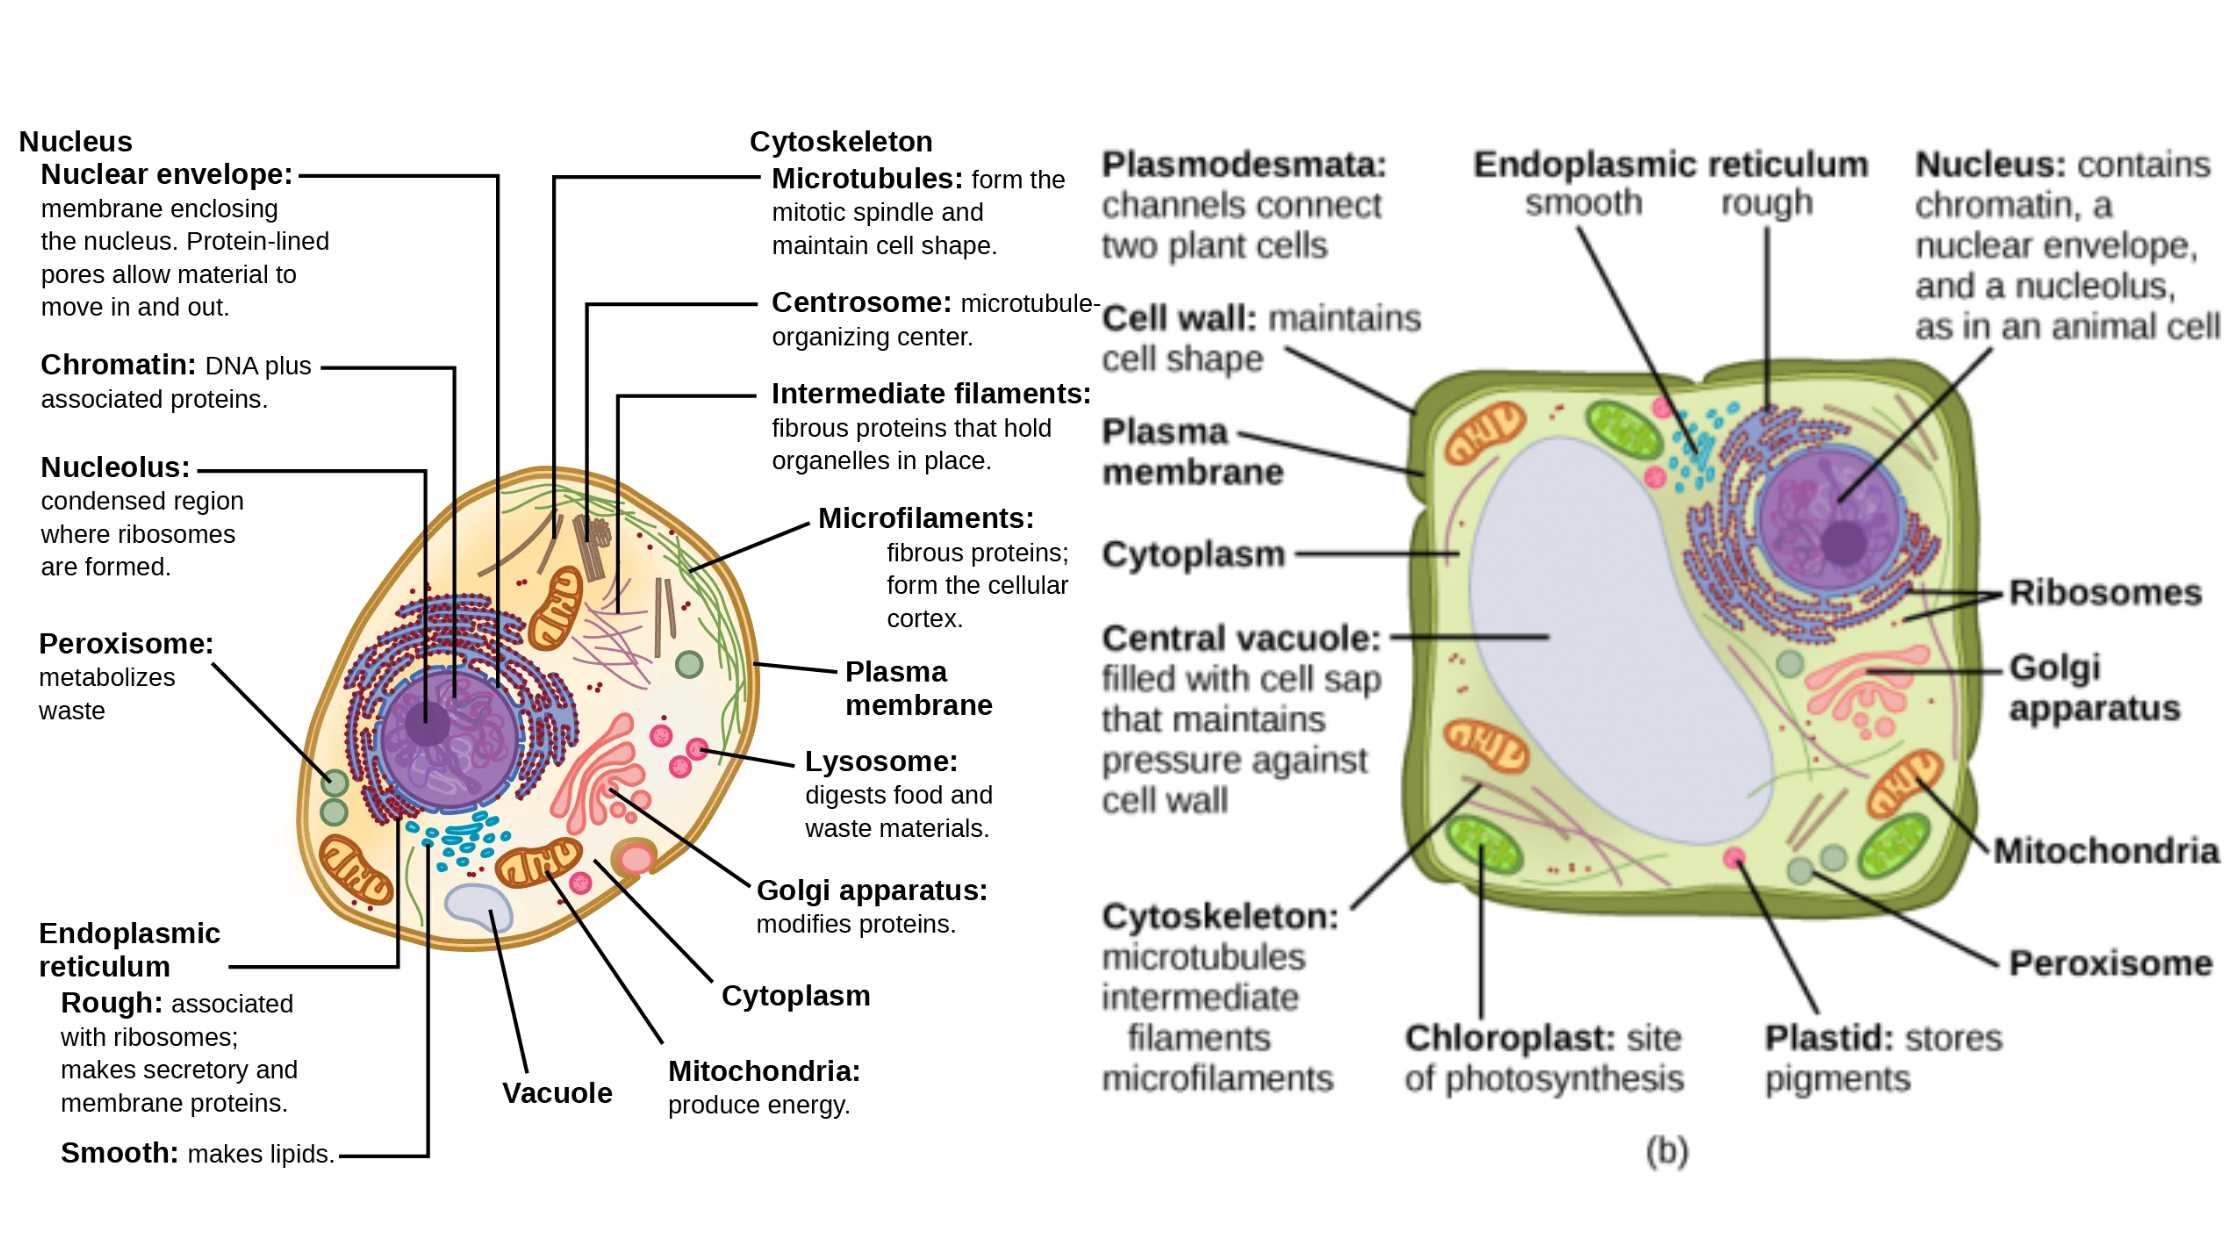 Eukaryotic Cell - Definition, Structure, Functions, Examples